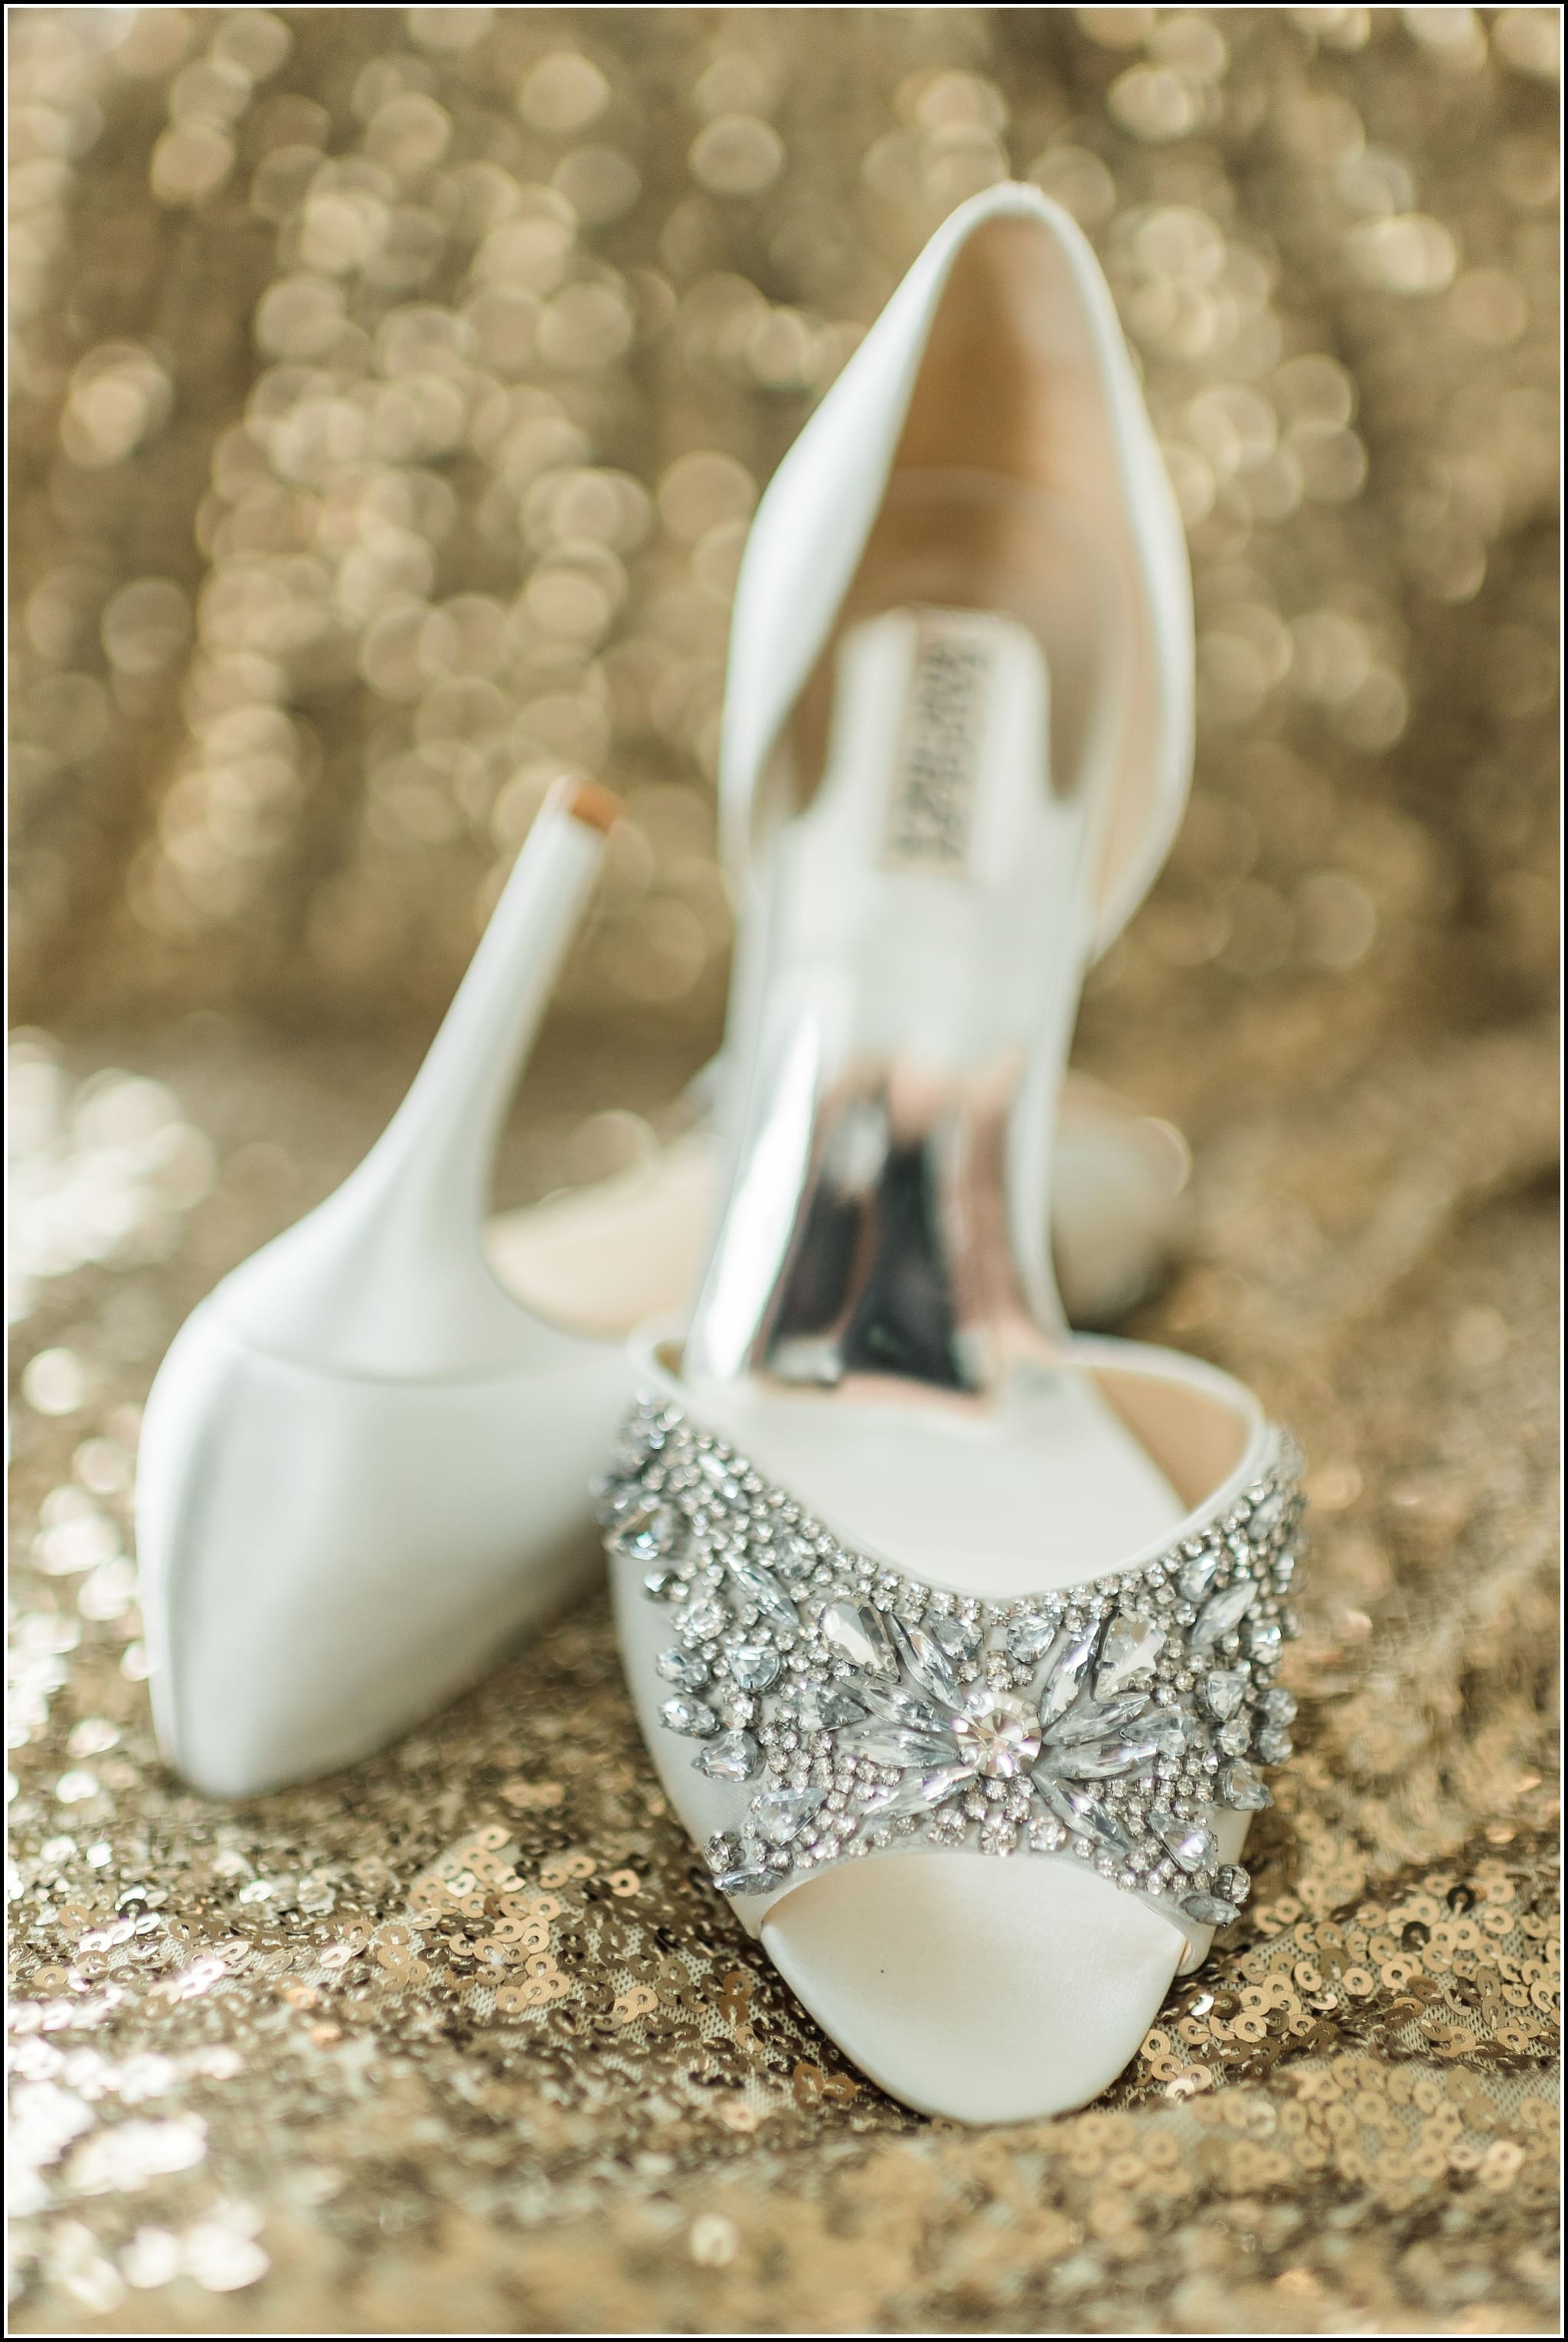  favorite wedding images 2016, wedding photos from 2016, our favorite wedding photos, bridal heels